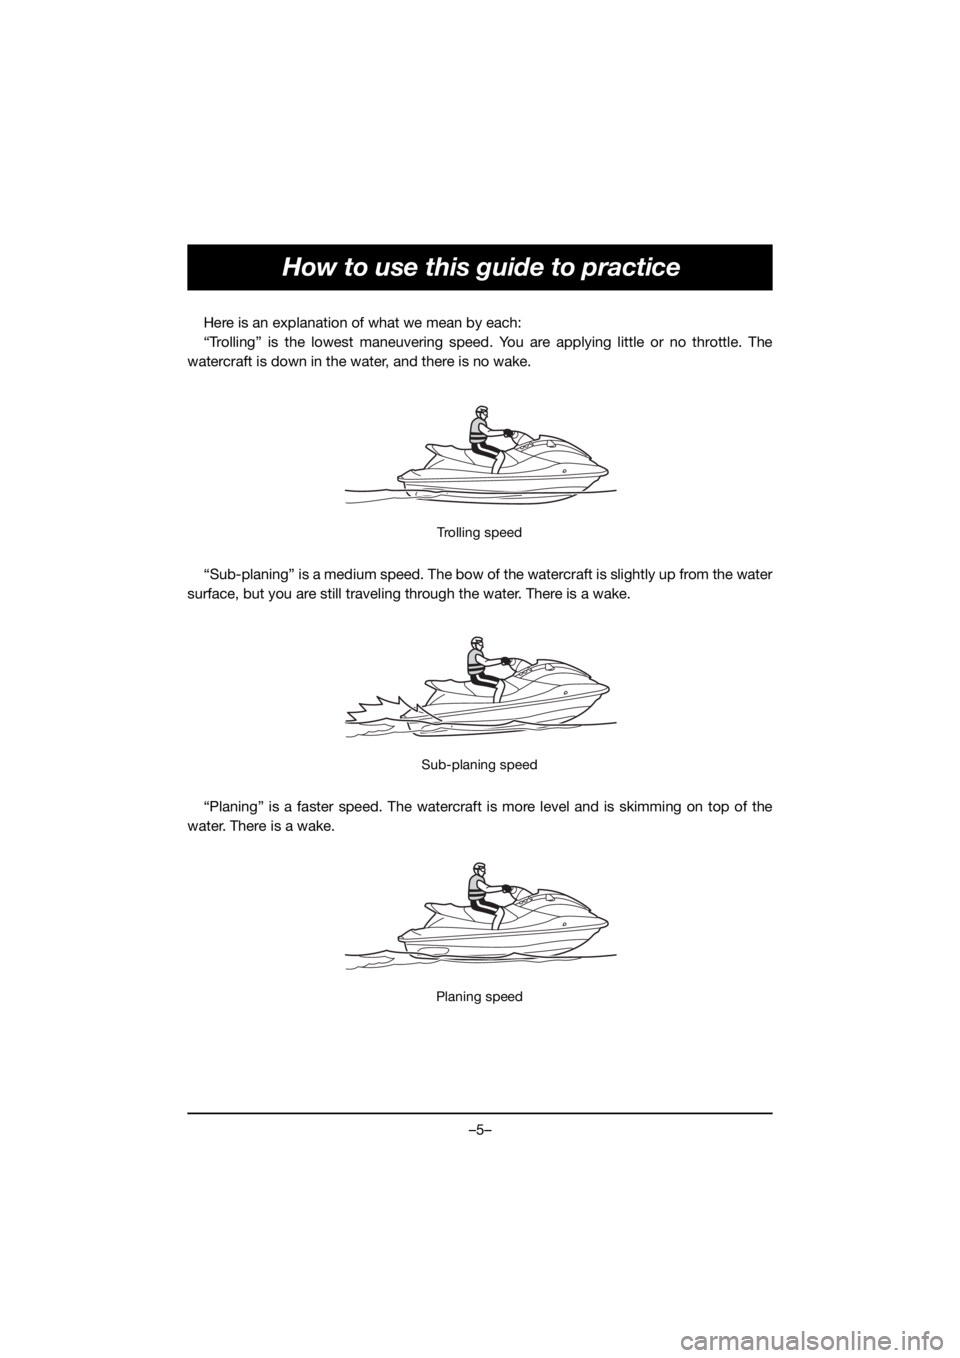 YAMAHA VX DELUXE 2020  Owners Manual –5–
How to use this guide to practice
Here is an explanation of what we mean by each:
“Trolling” is the lowest maneuvering speed. You are applying little or no throttle. The
watercraft is down